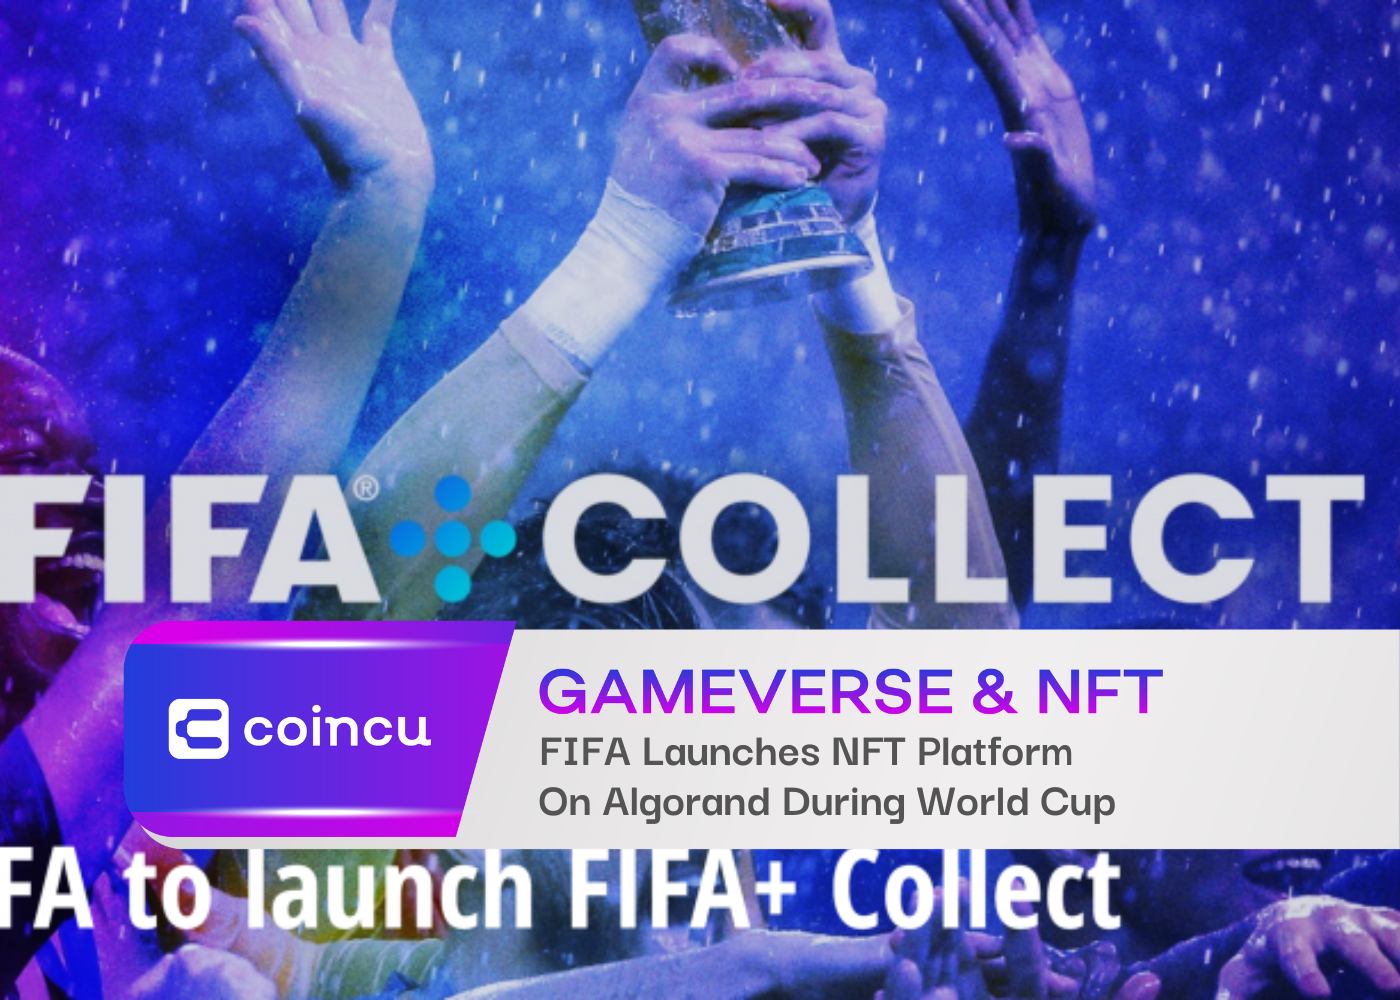 FIFA Launches NFT Platform on Algorand in Run-Up to World Cup - Decrypt